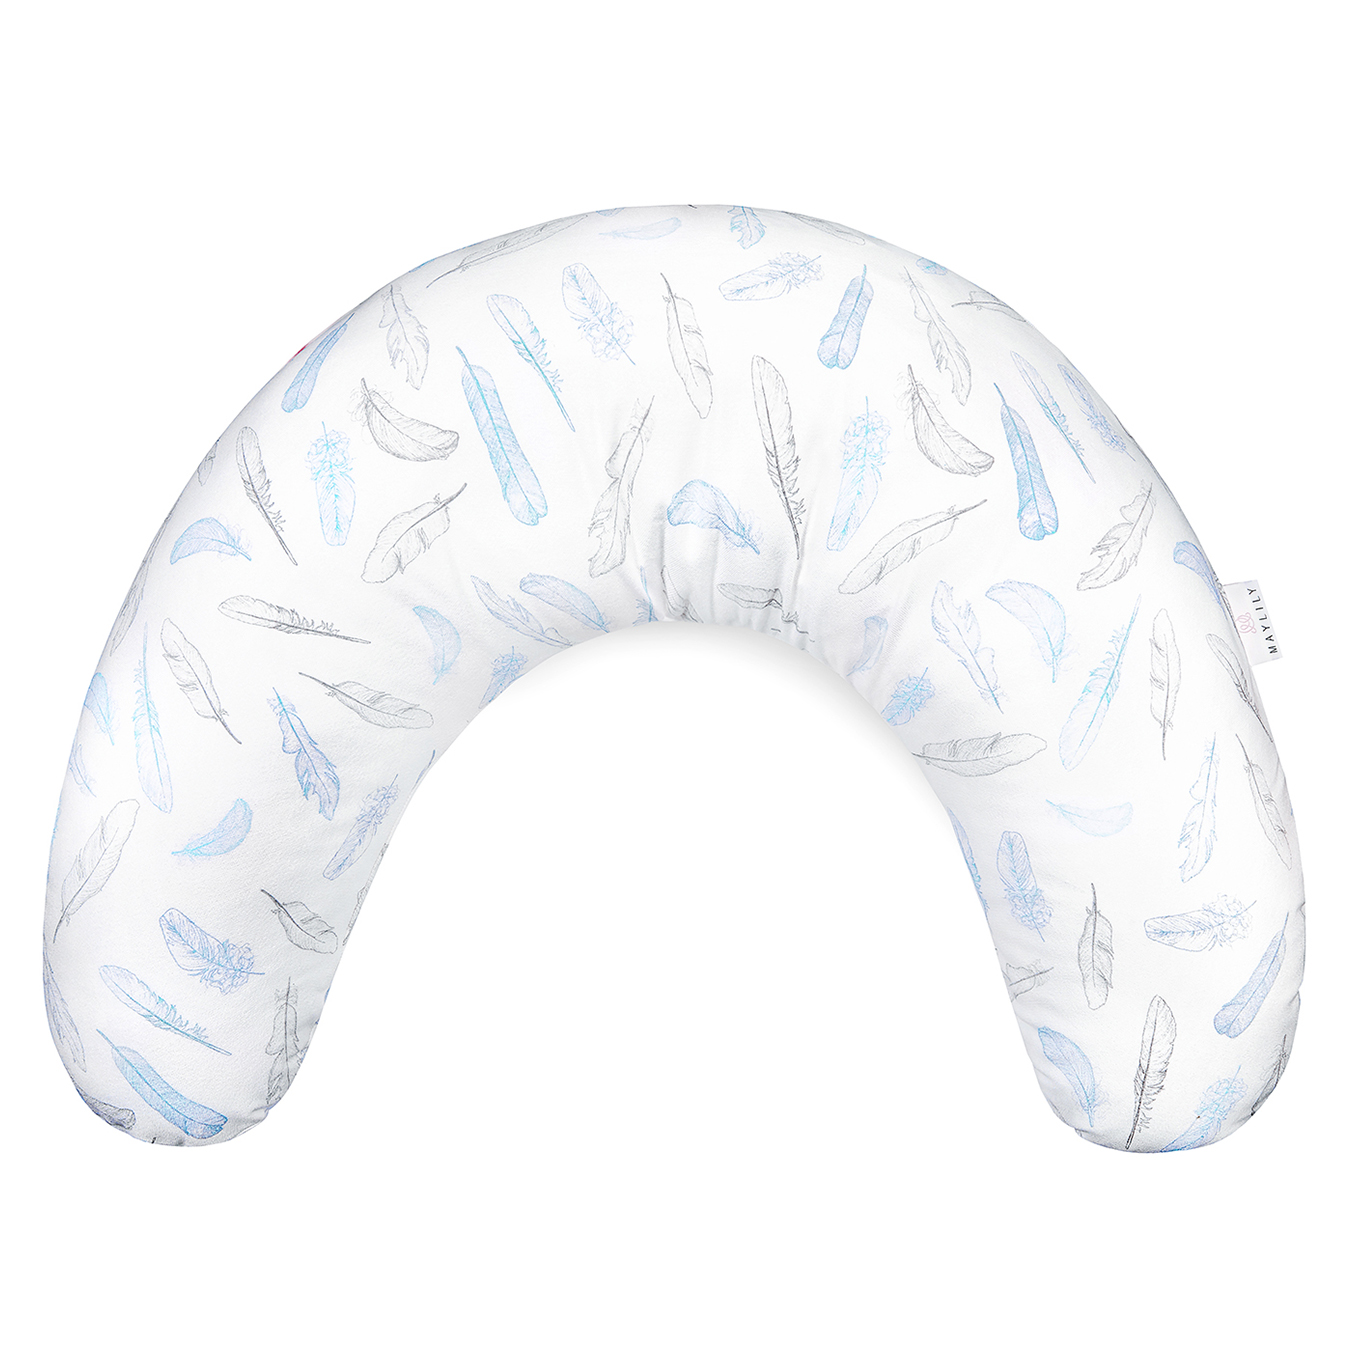 Maternity pillow 2in1 - Heavenly feathers